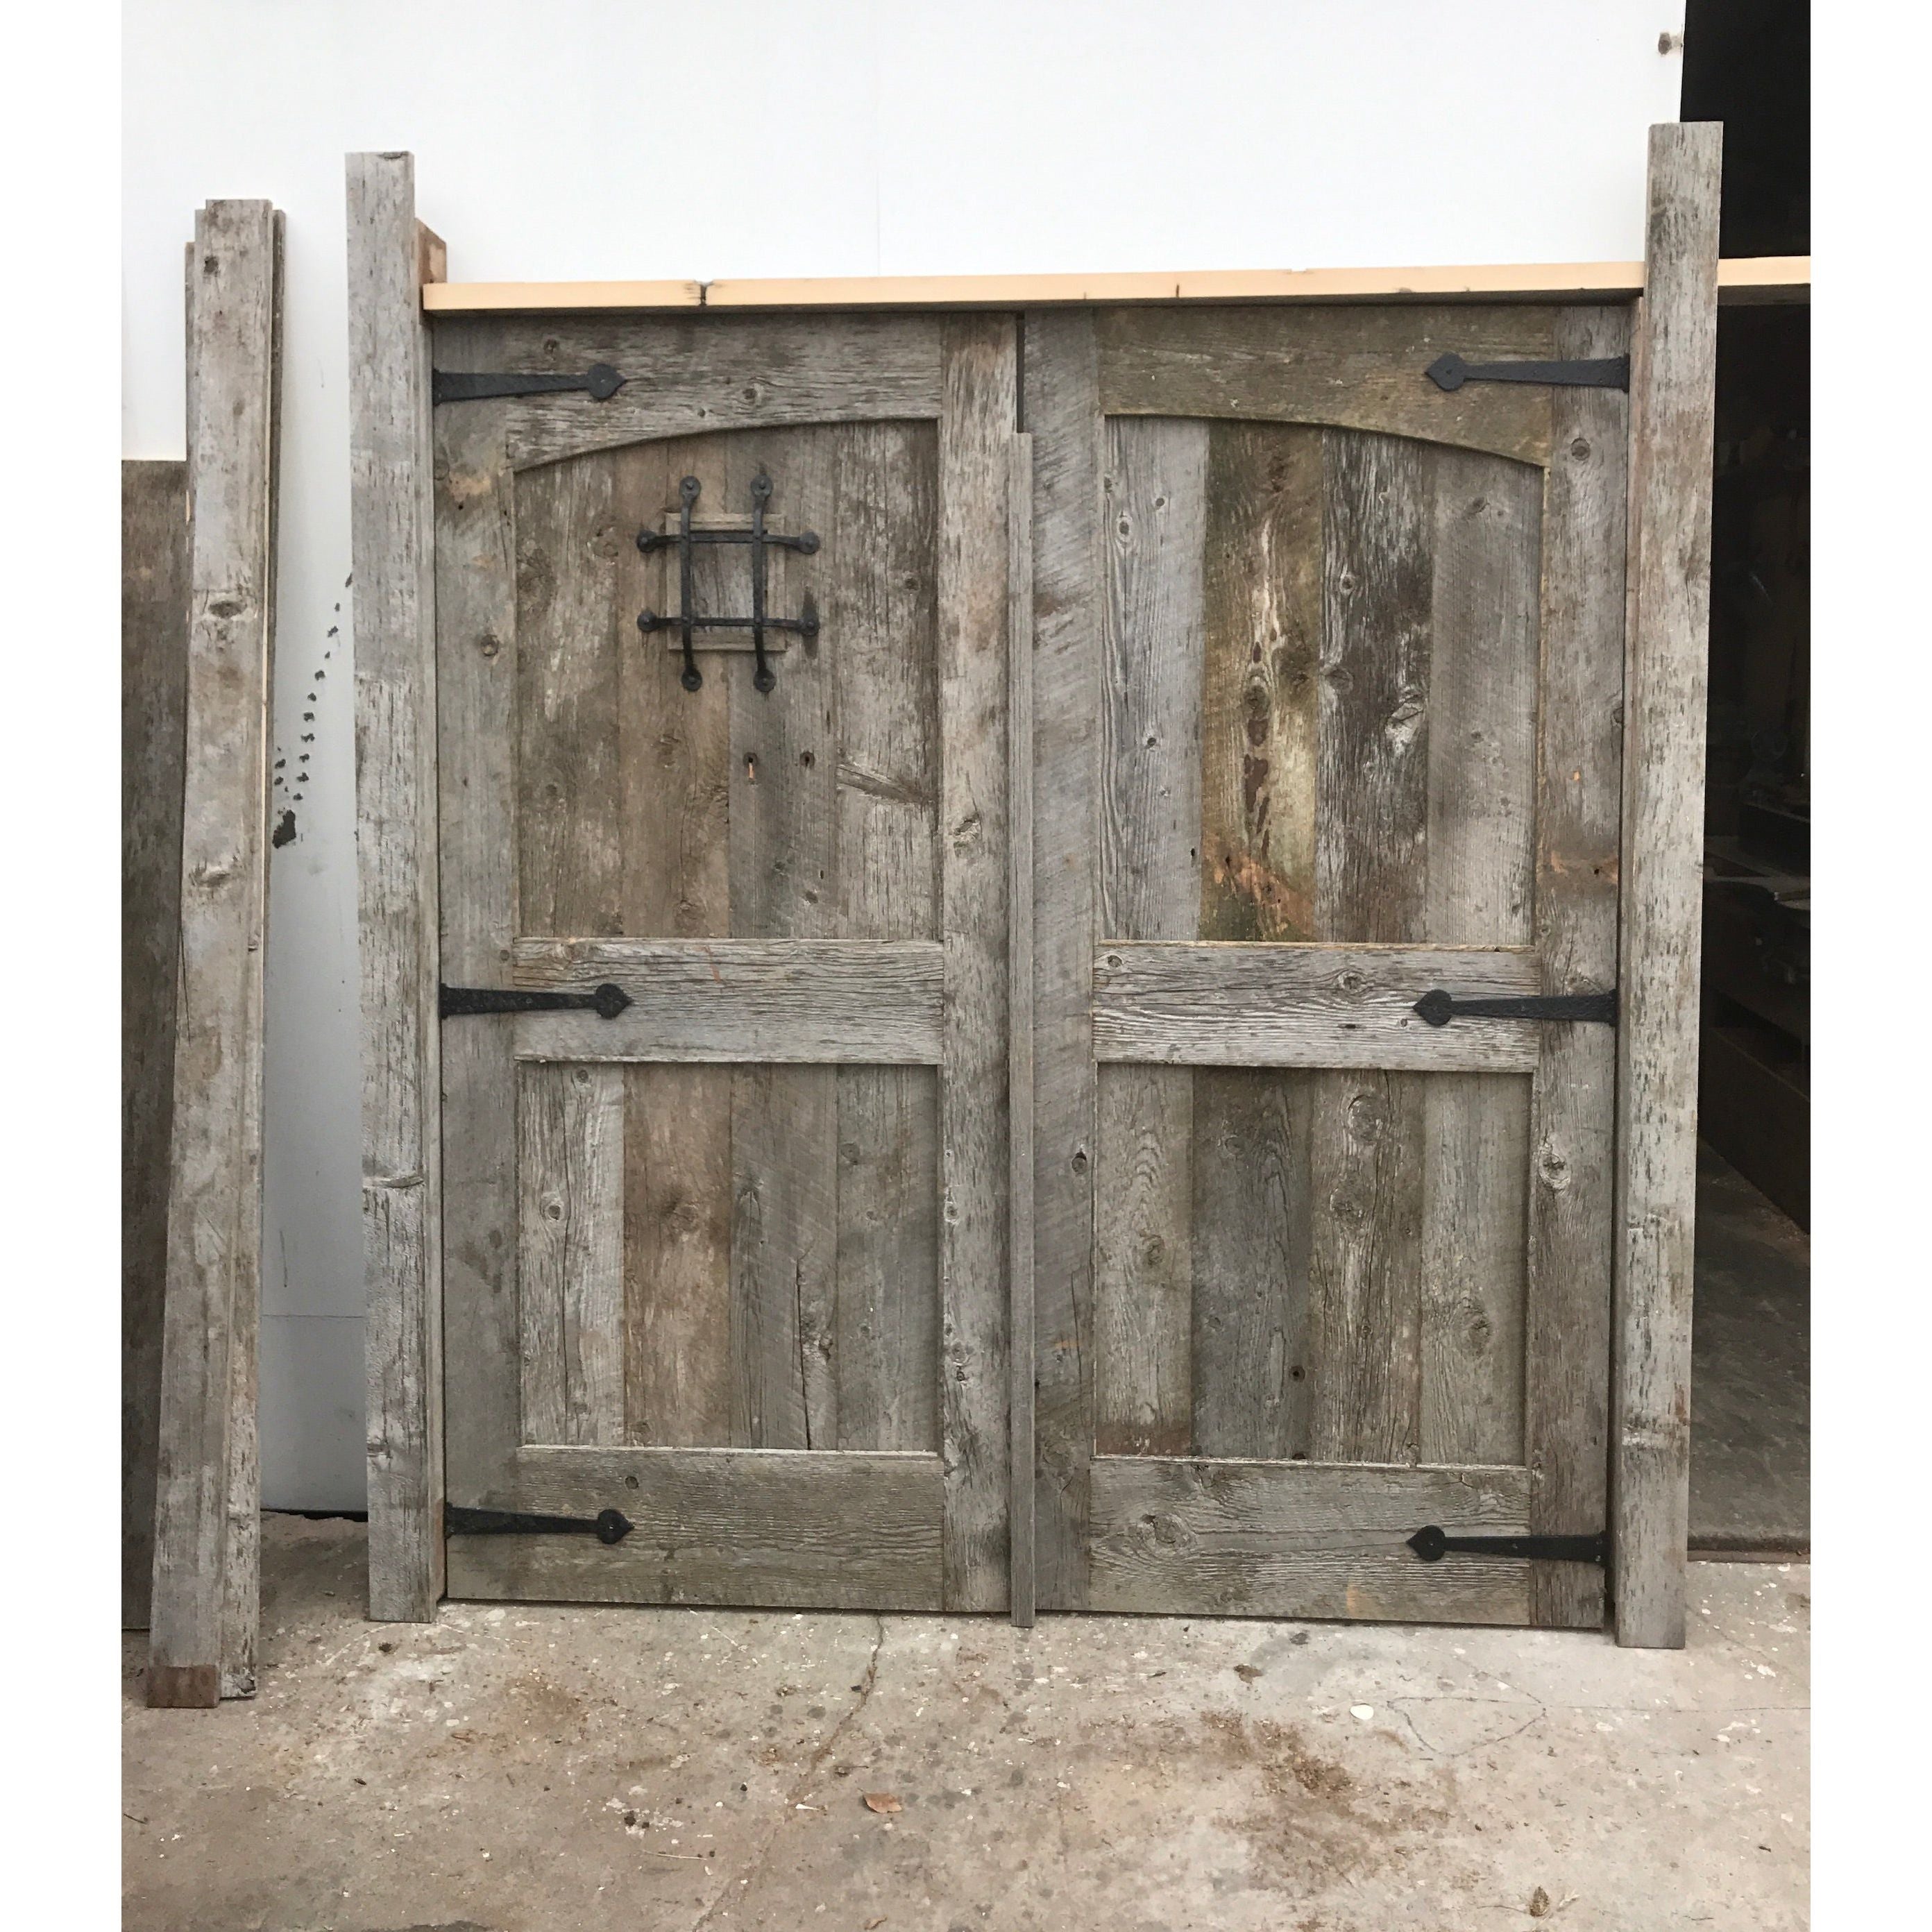 Collection 100+ Images pictures of old barn doors Full HD, 2k, 4k